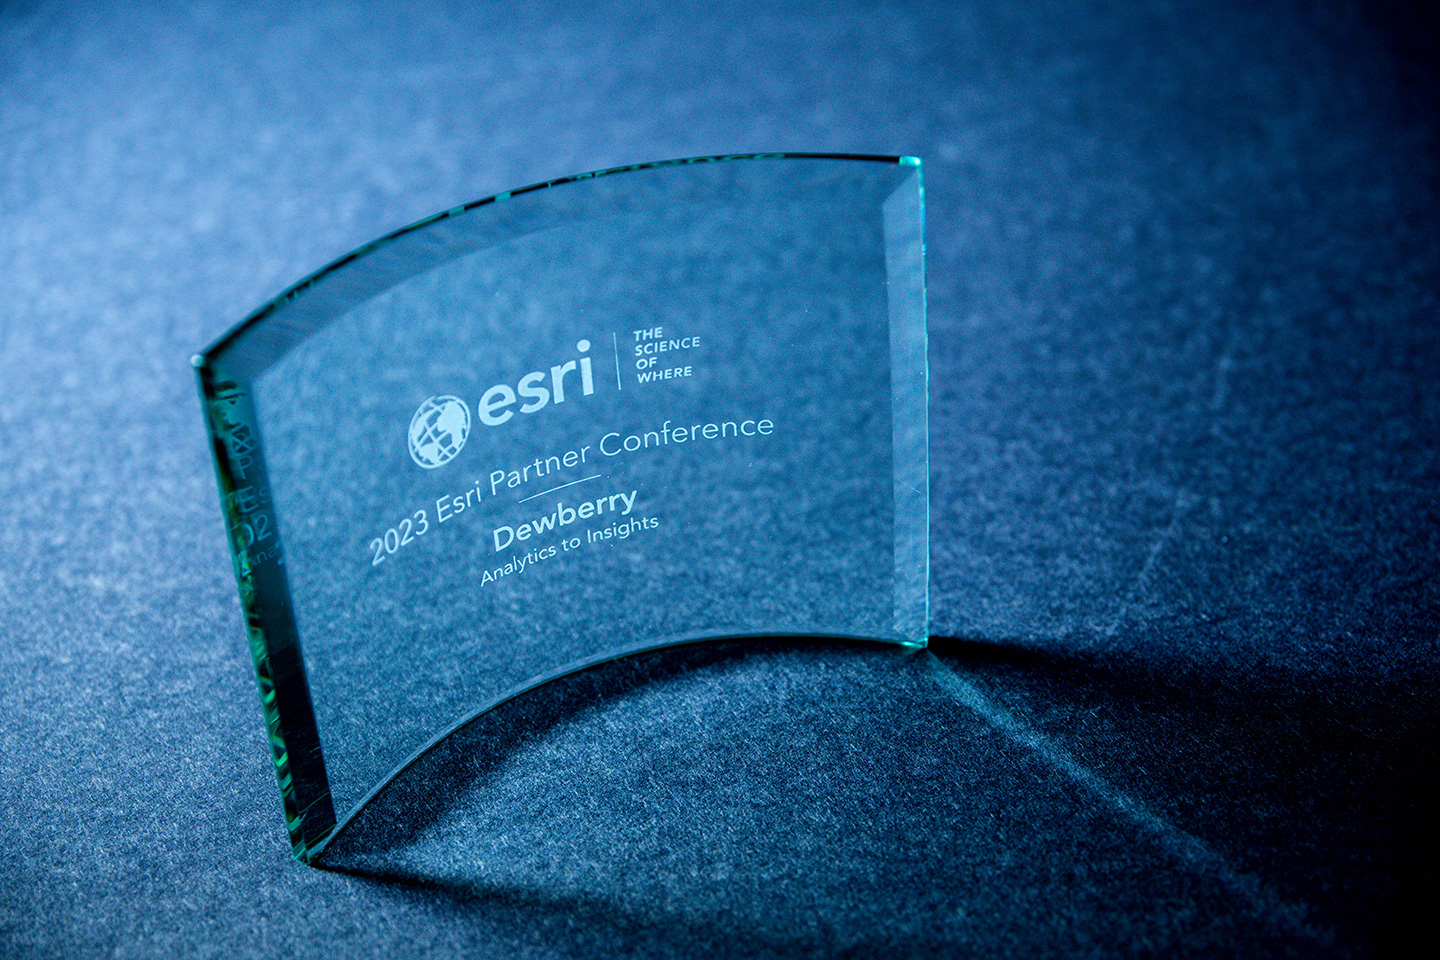 Dewberry receives Analytics to Insights Esri Partner Conference Award.